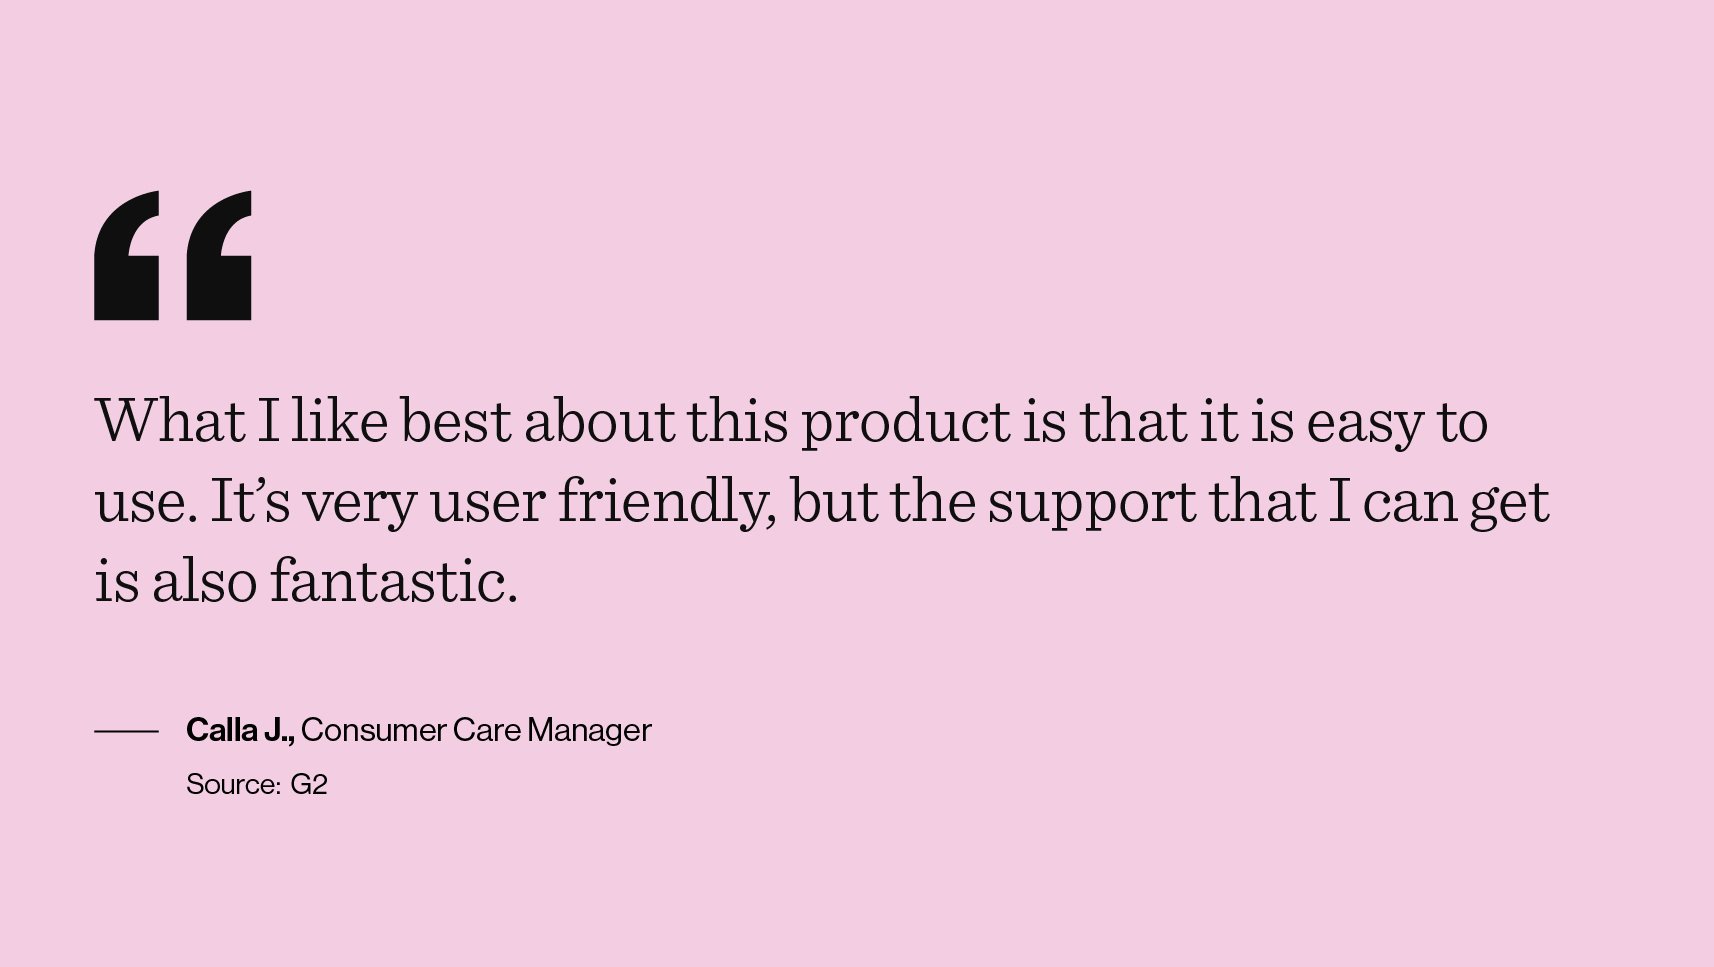 A quote pulled from the G2.com reviews. The quote reads, "What I like best about this product is that it is easy to use. It's very user friendly, but the support that I can get is also fantastic." - Calla J., Consumer Care Manager